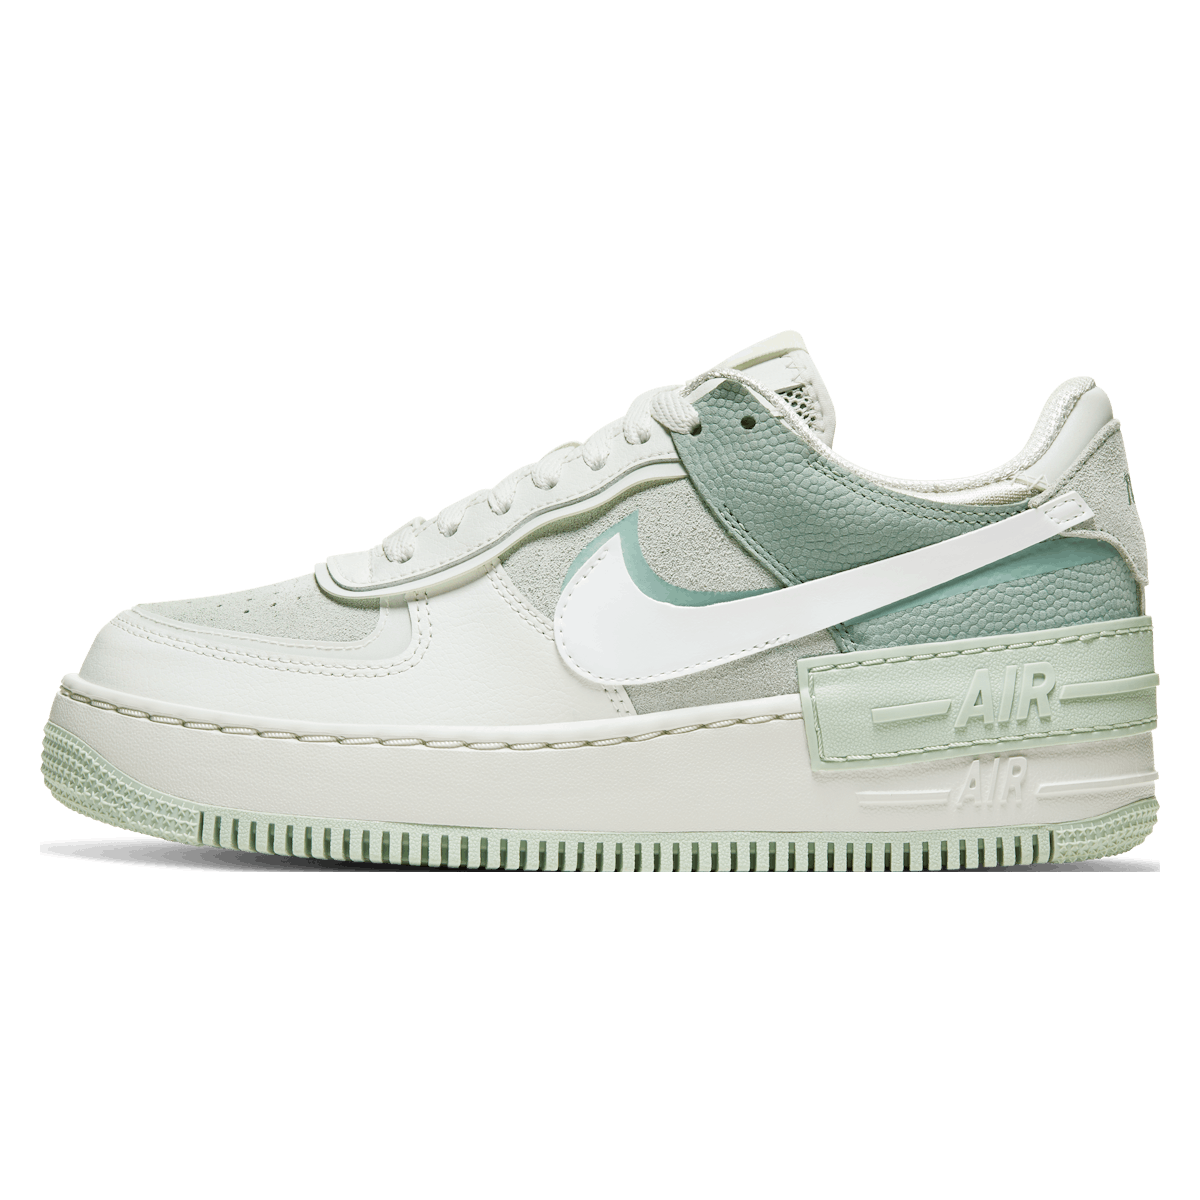 Nike Air Force 1 Shadow Wmns "Pistachio Frost"